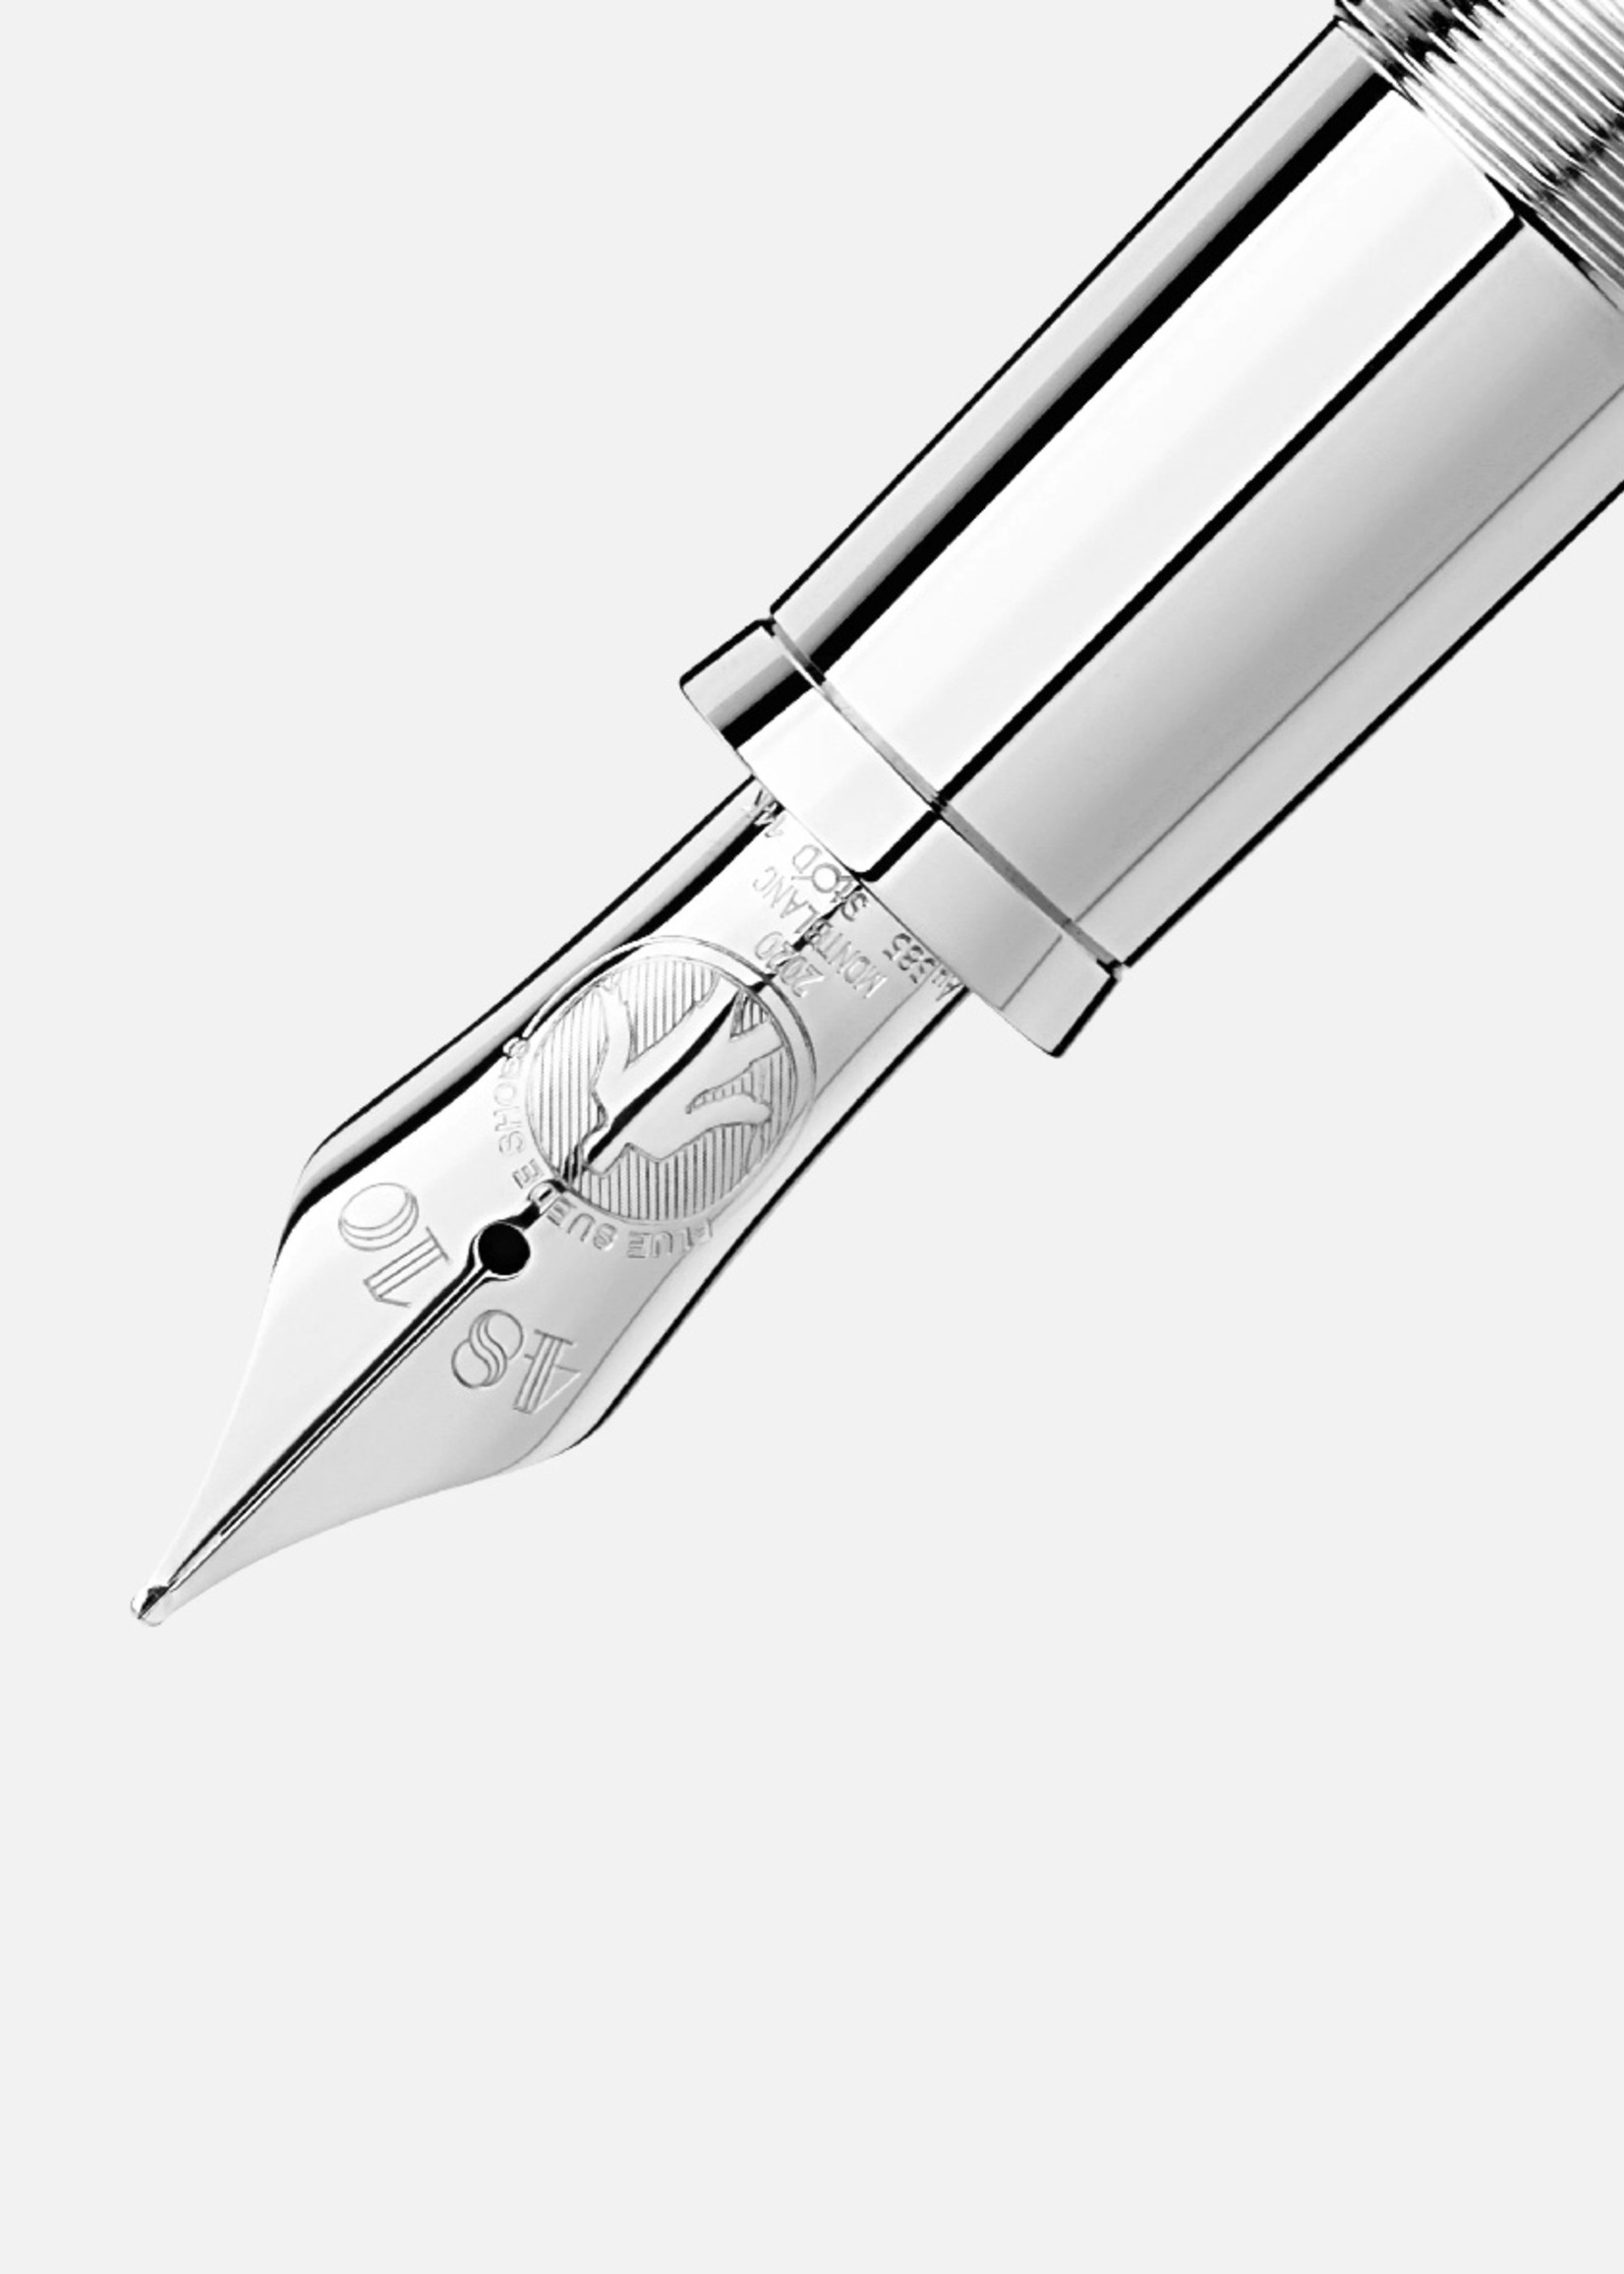 MONTBLANC Great Characters Elvis Presley Special Edition Vulpen M - Medium 0.62 mm 20% KORTING